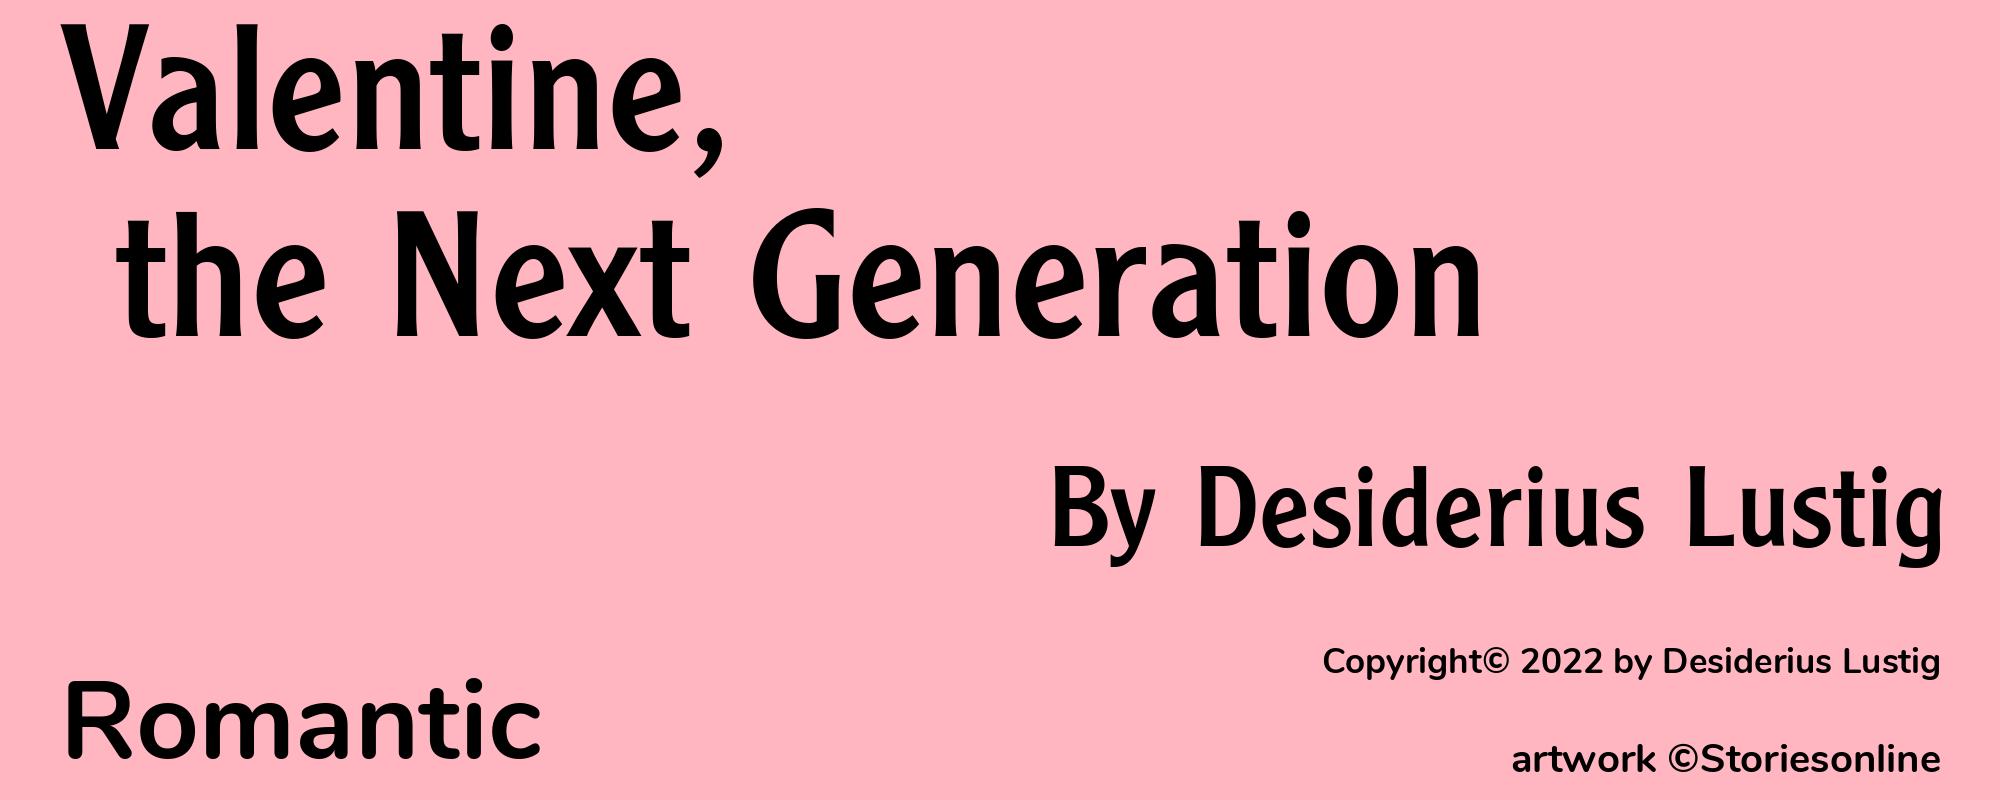 Valentine, the Next Generation - Cover